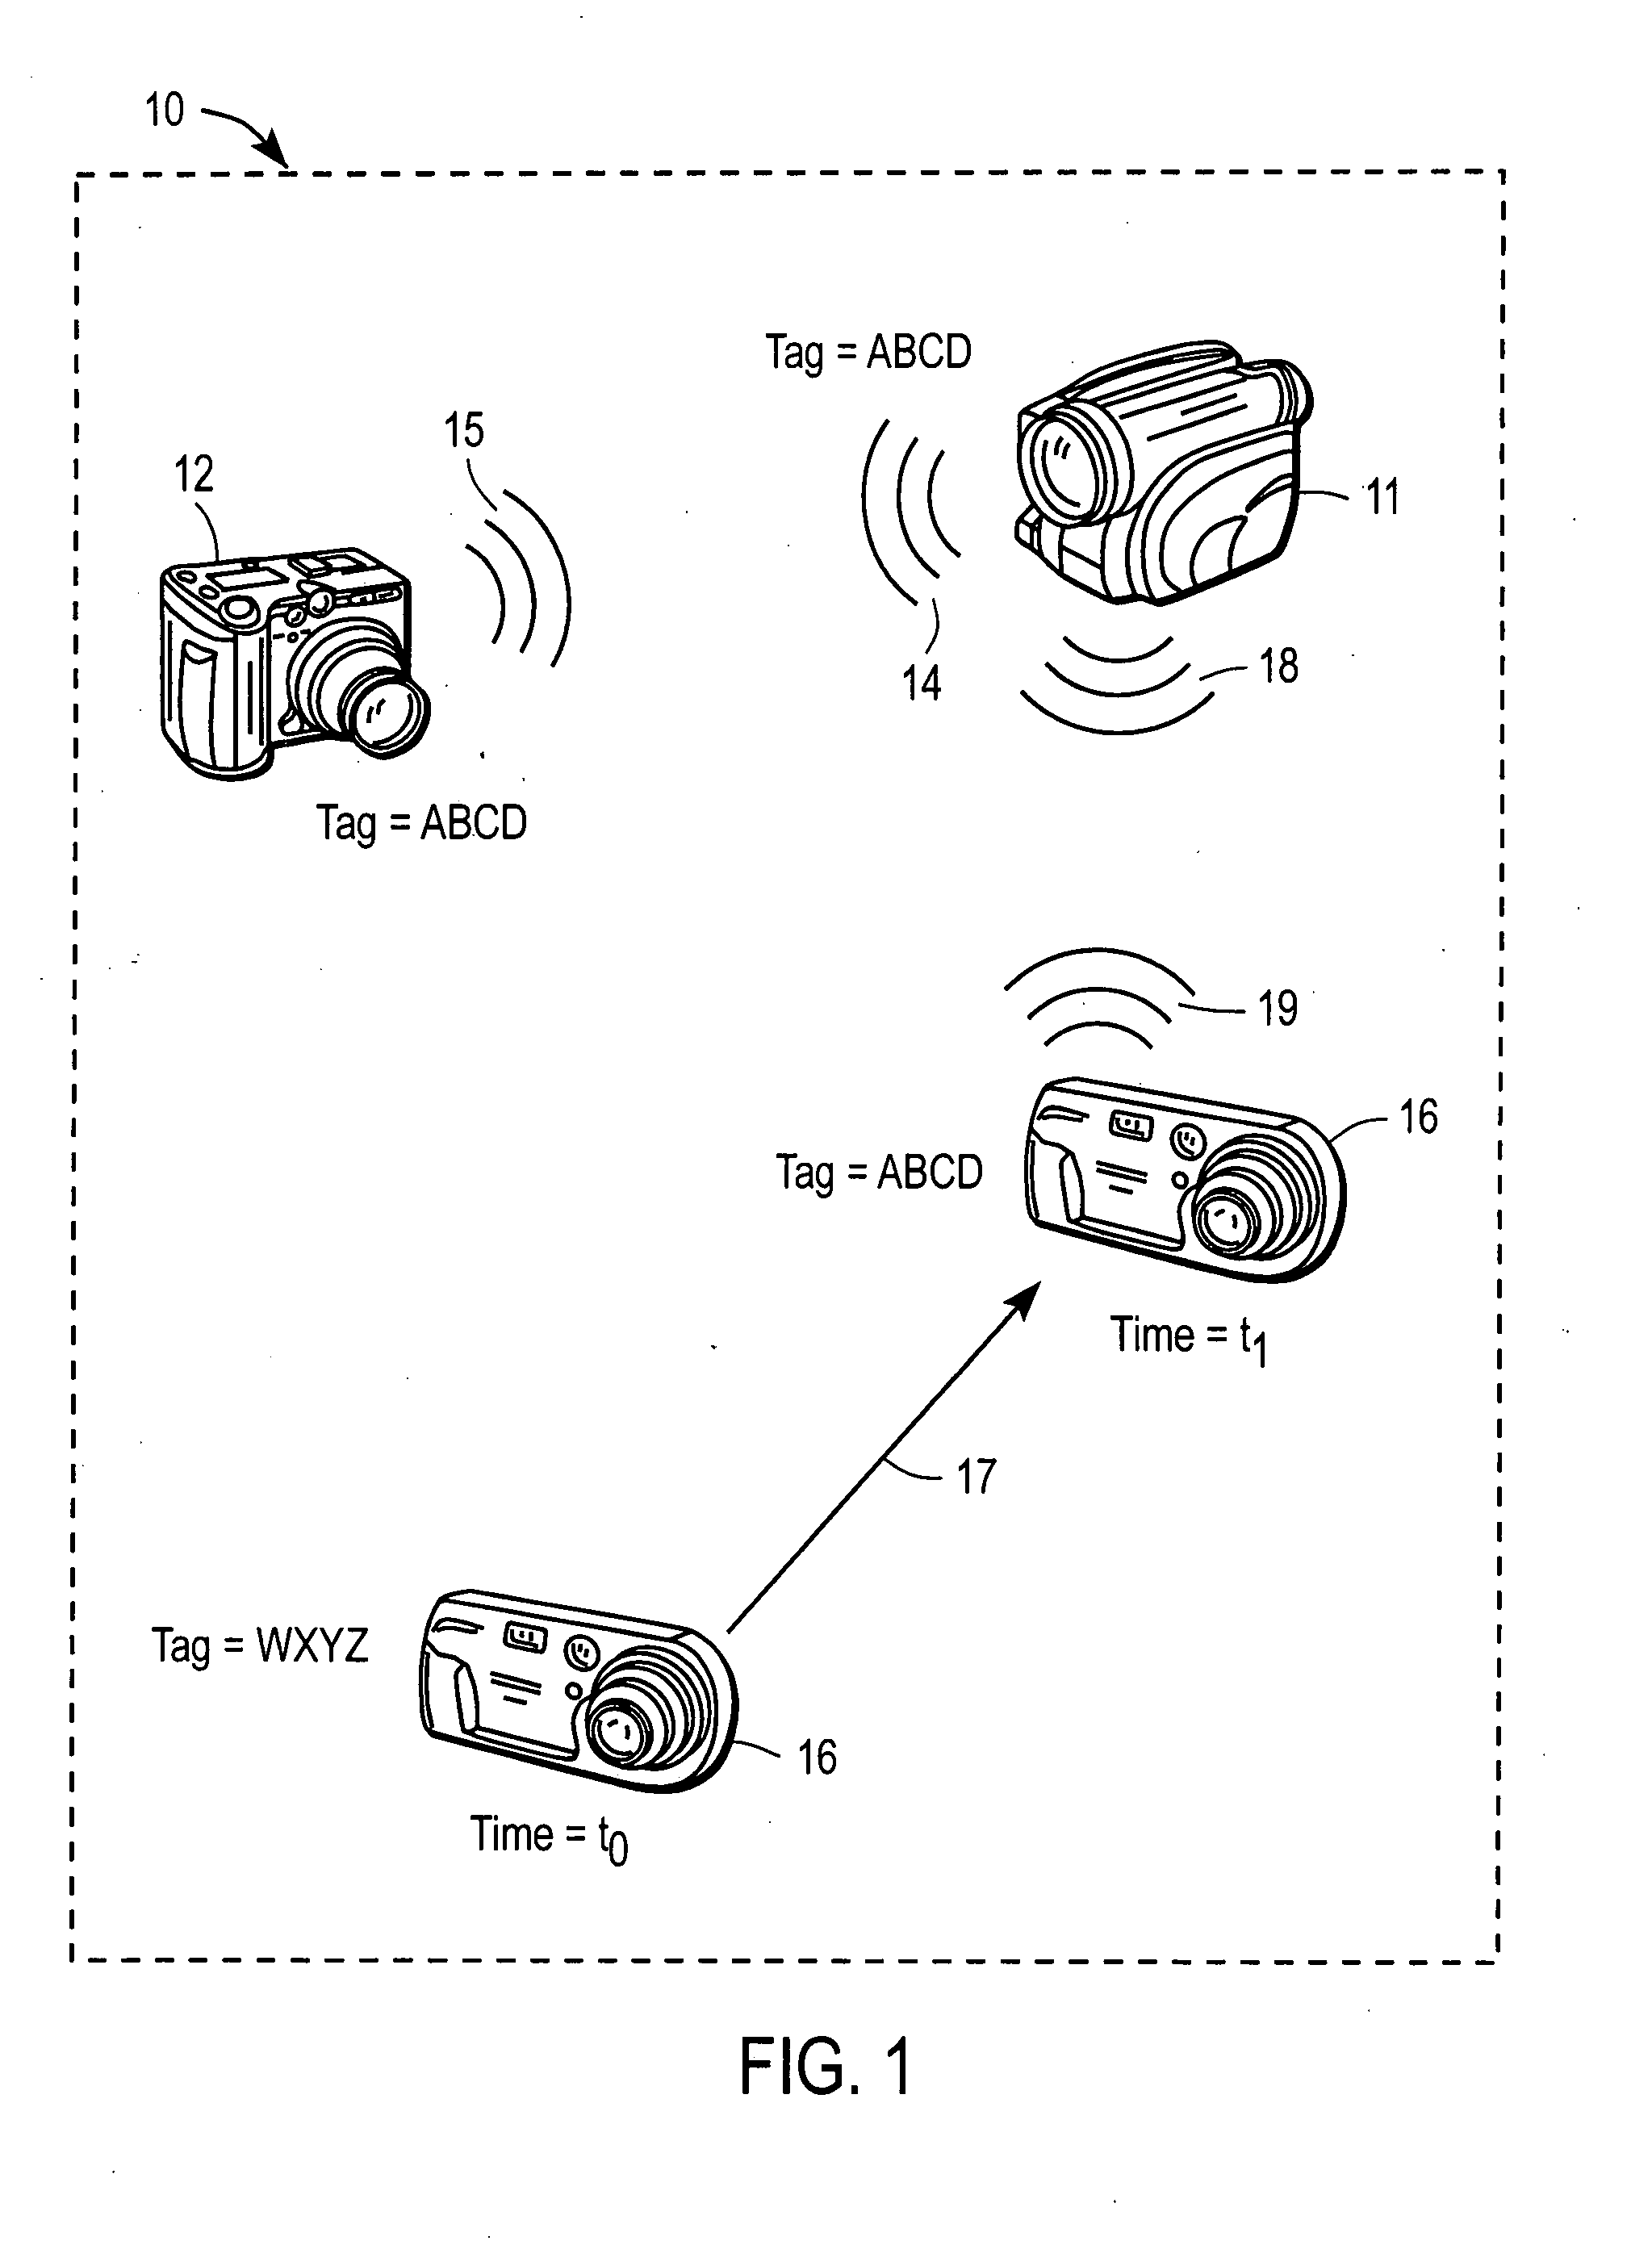 Wirelessly-enabled identification of digital media generated at an event